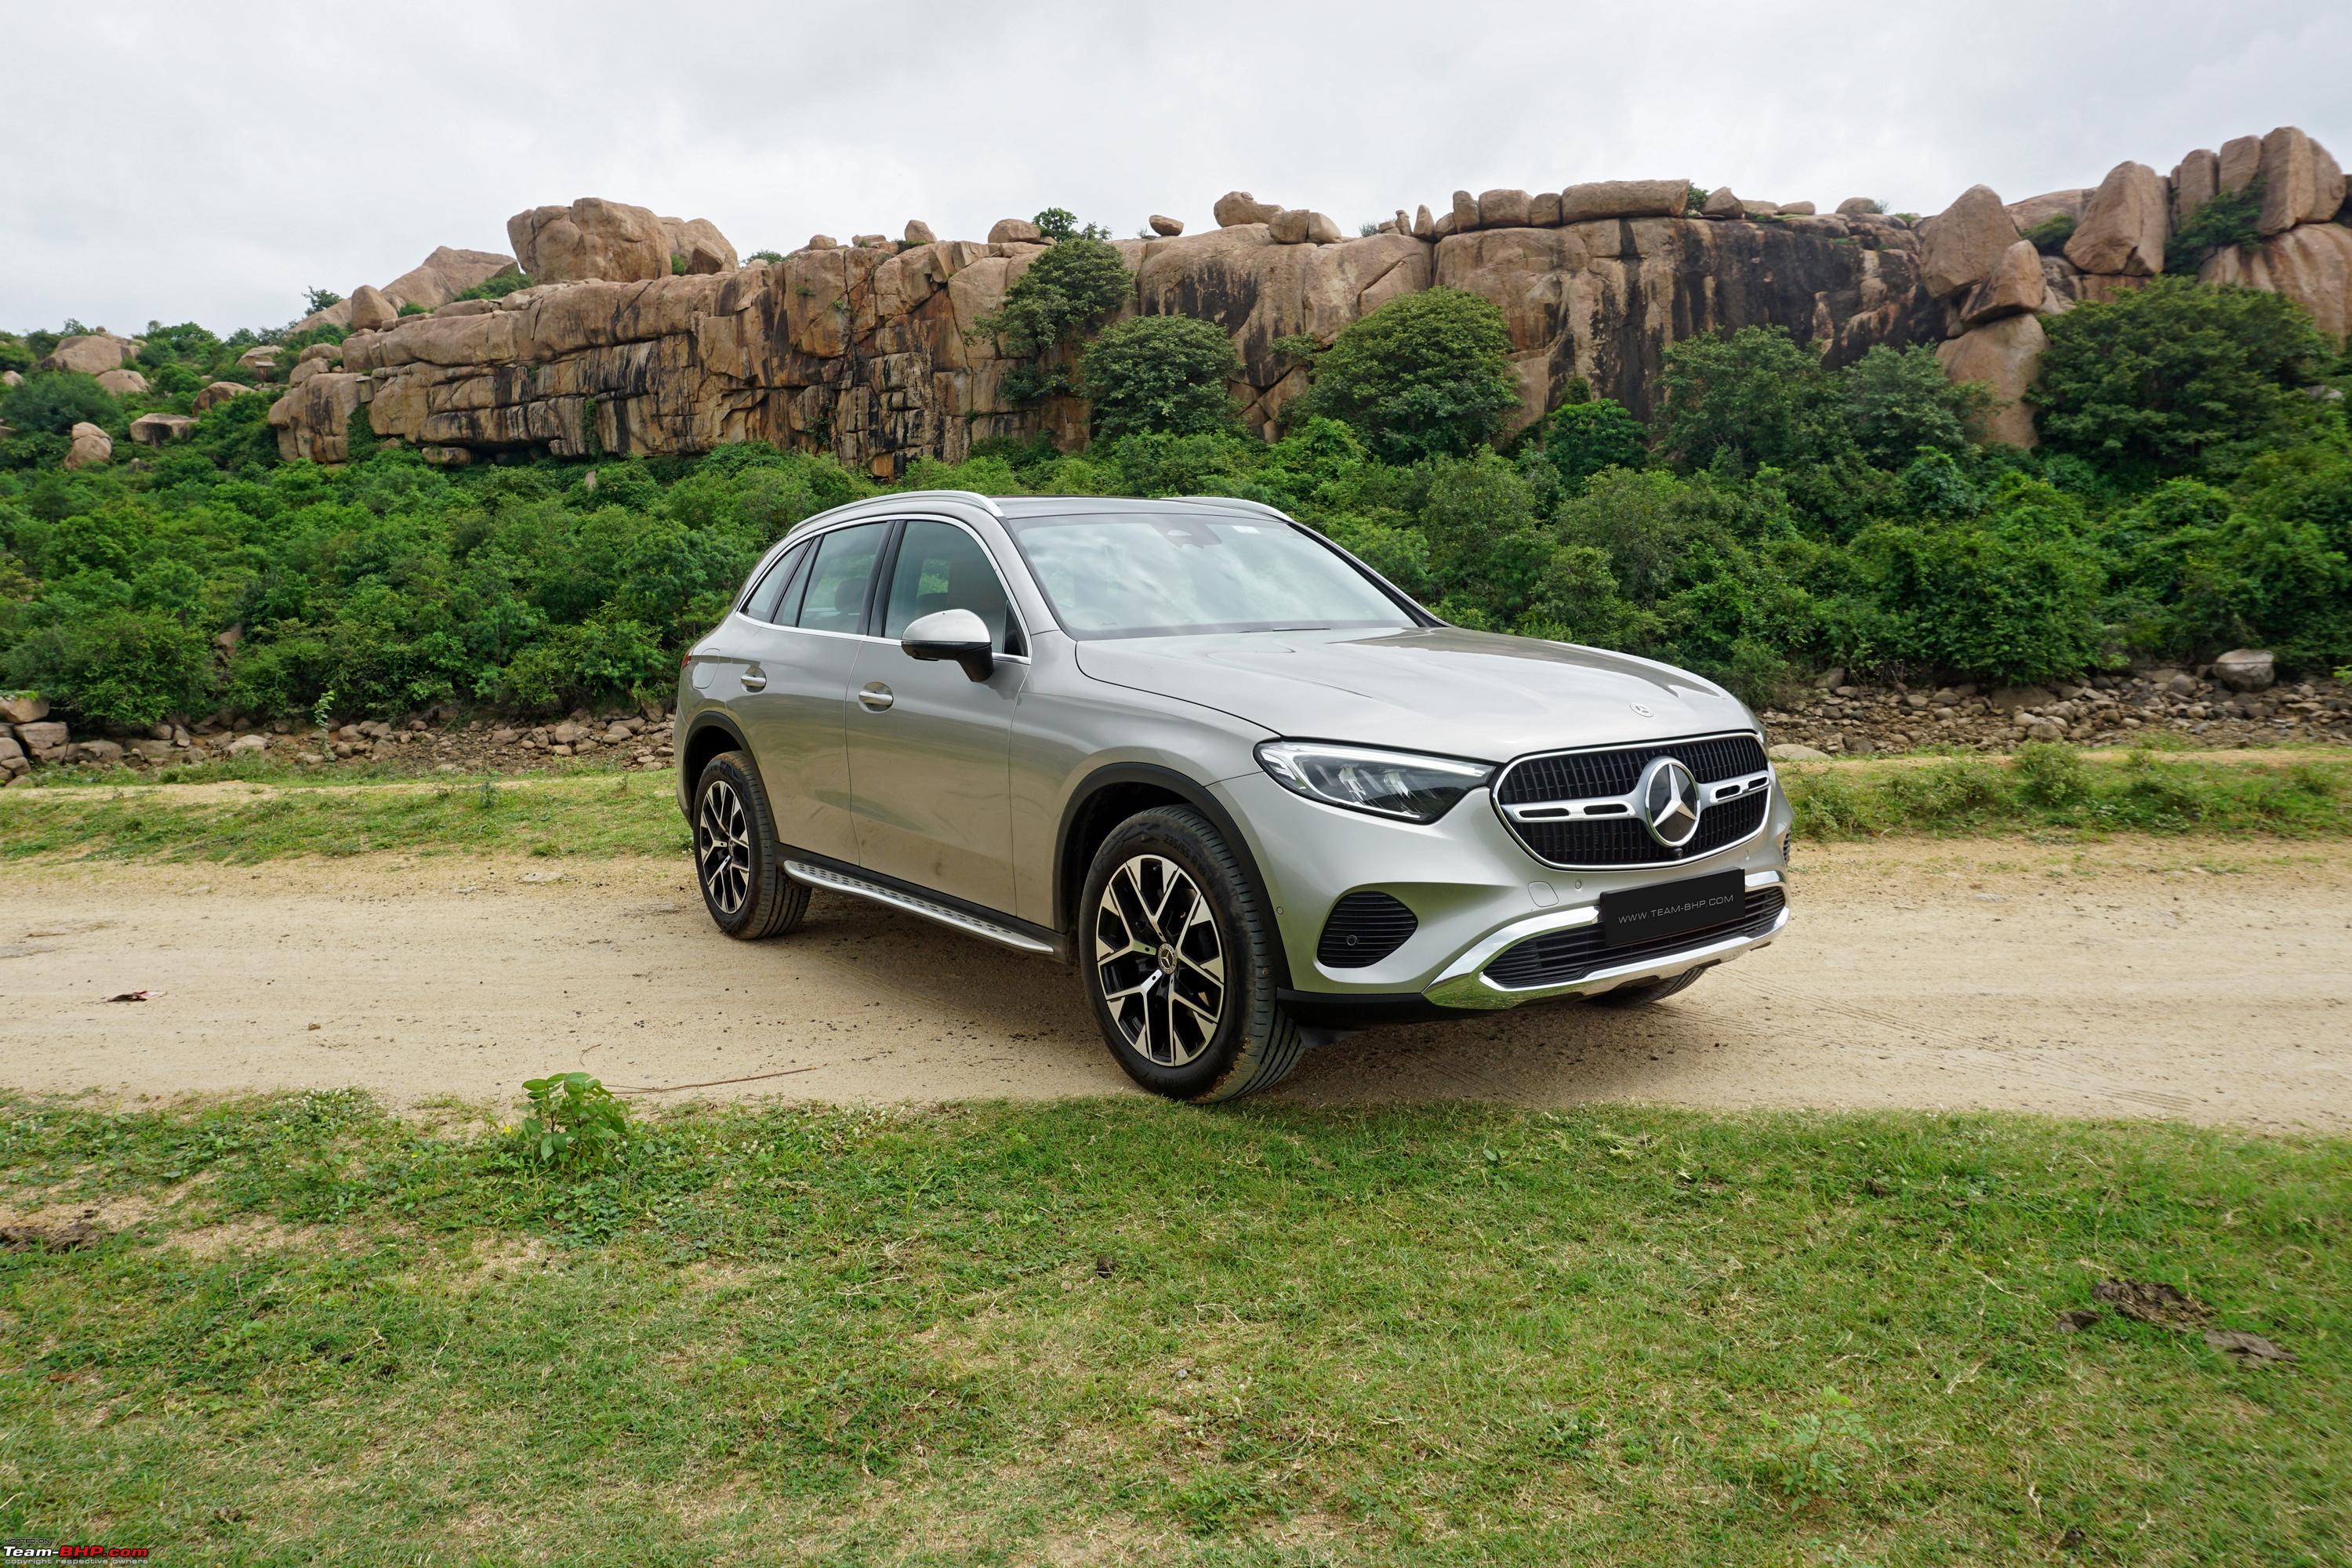 Mercedes-Benz GLC - A SUV for keen drivers?